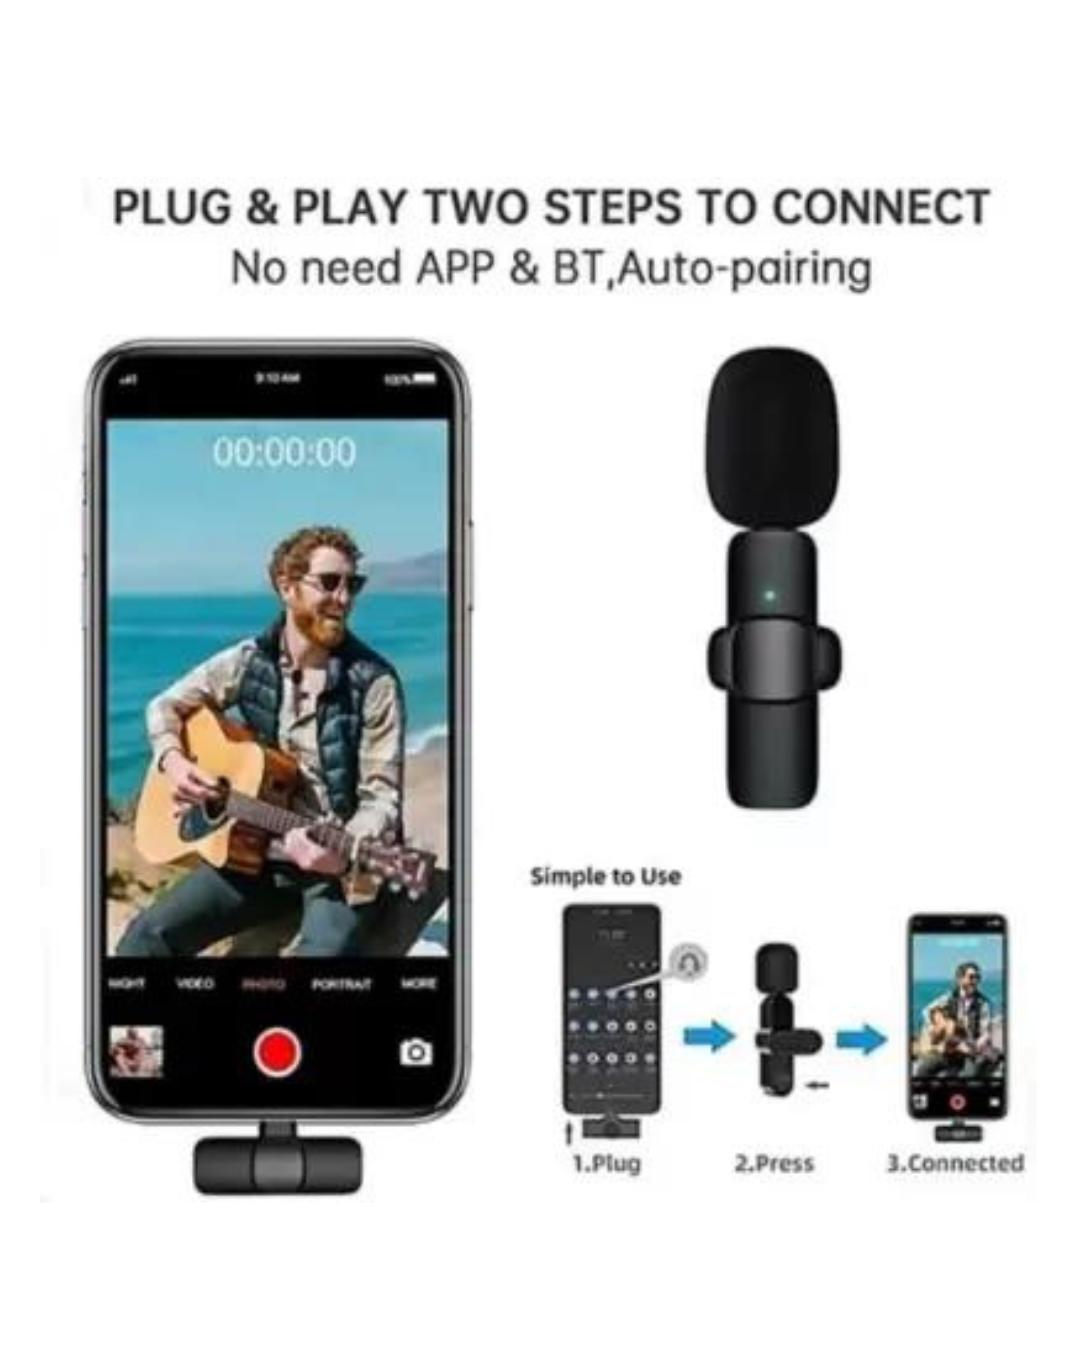  K8 YouTube Wireless Mic Plug & Play Type C Collar Mic Support Android-IOS Microphone